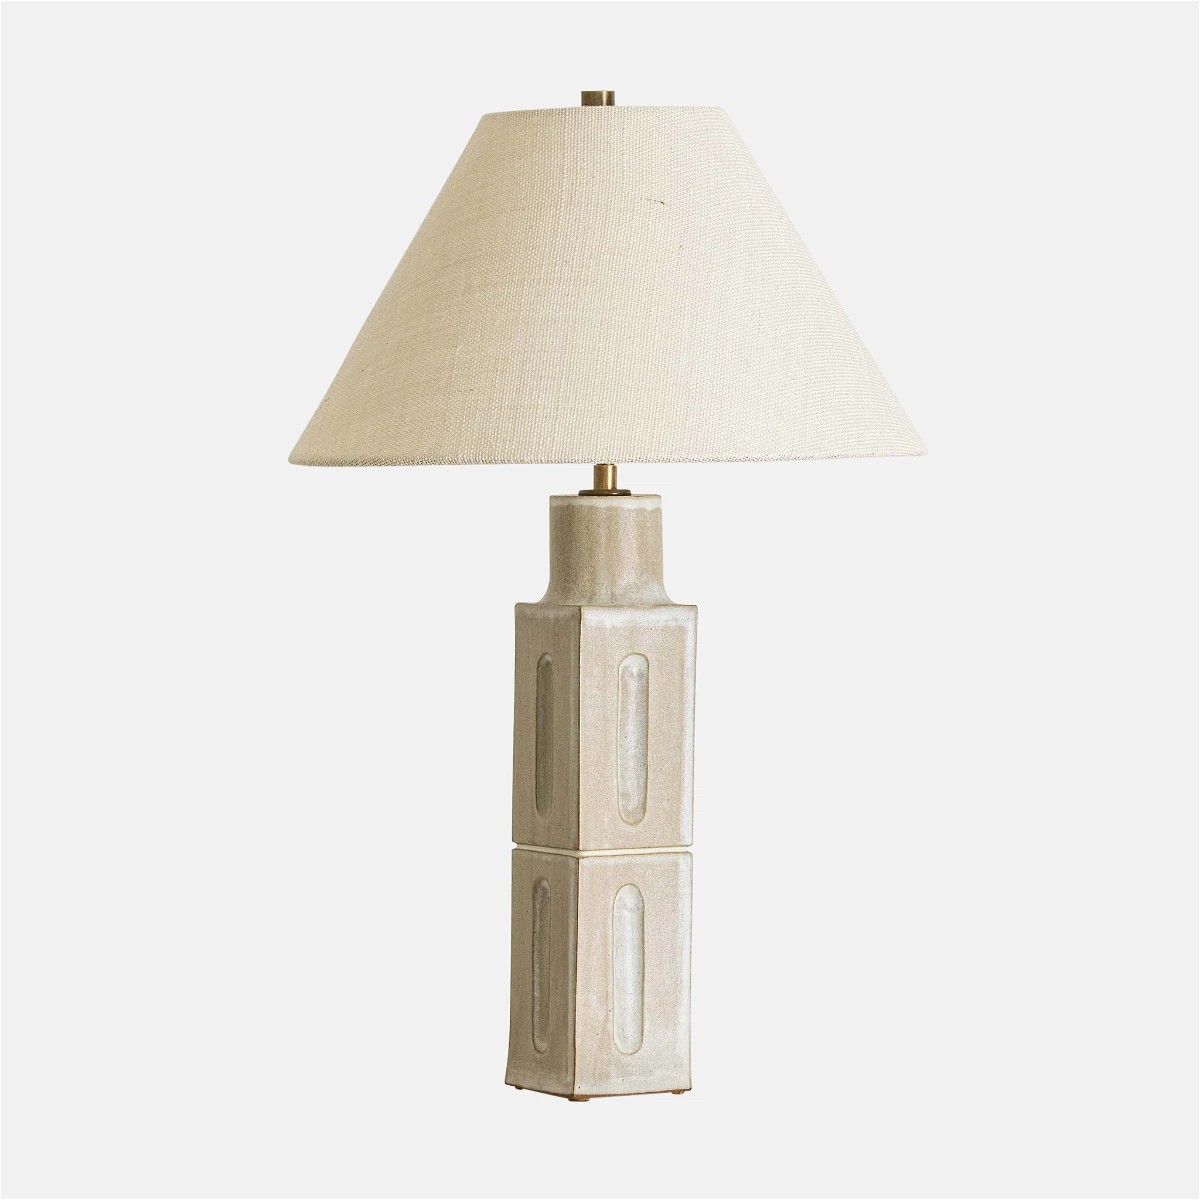 The image of an Narrow Stone Lamp product